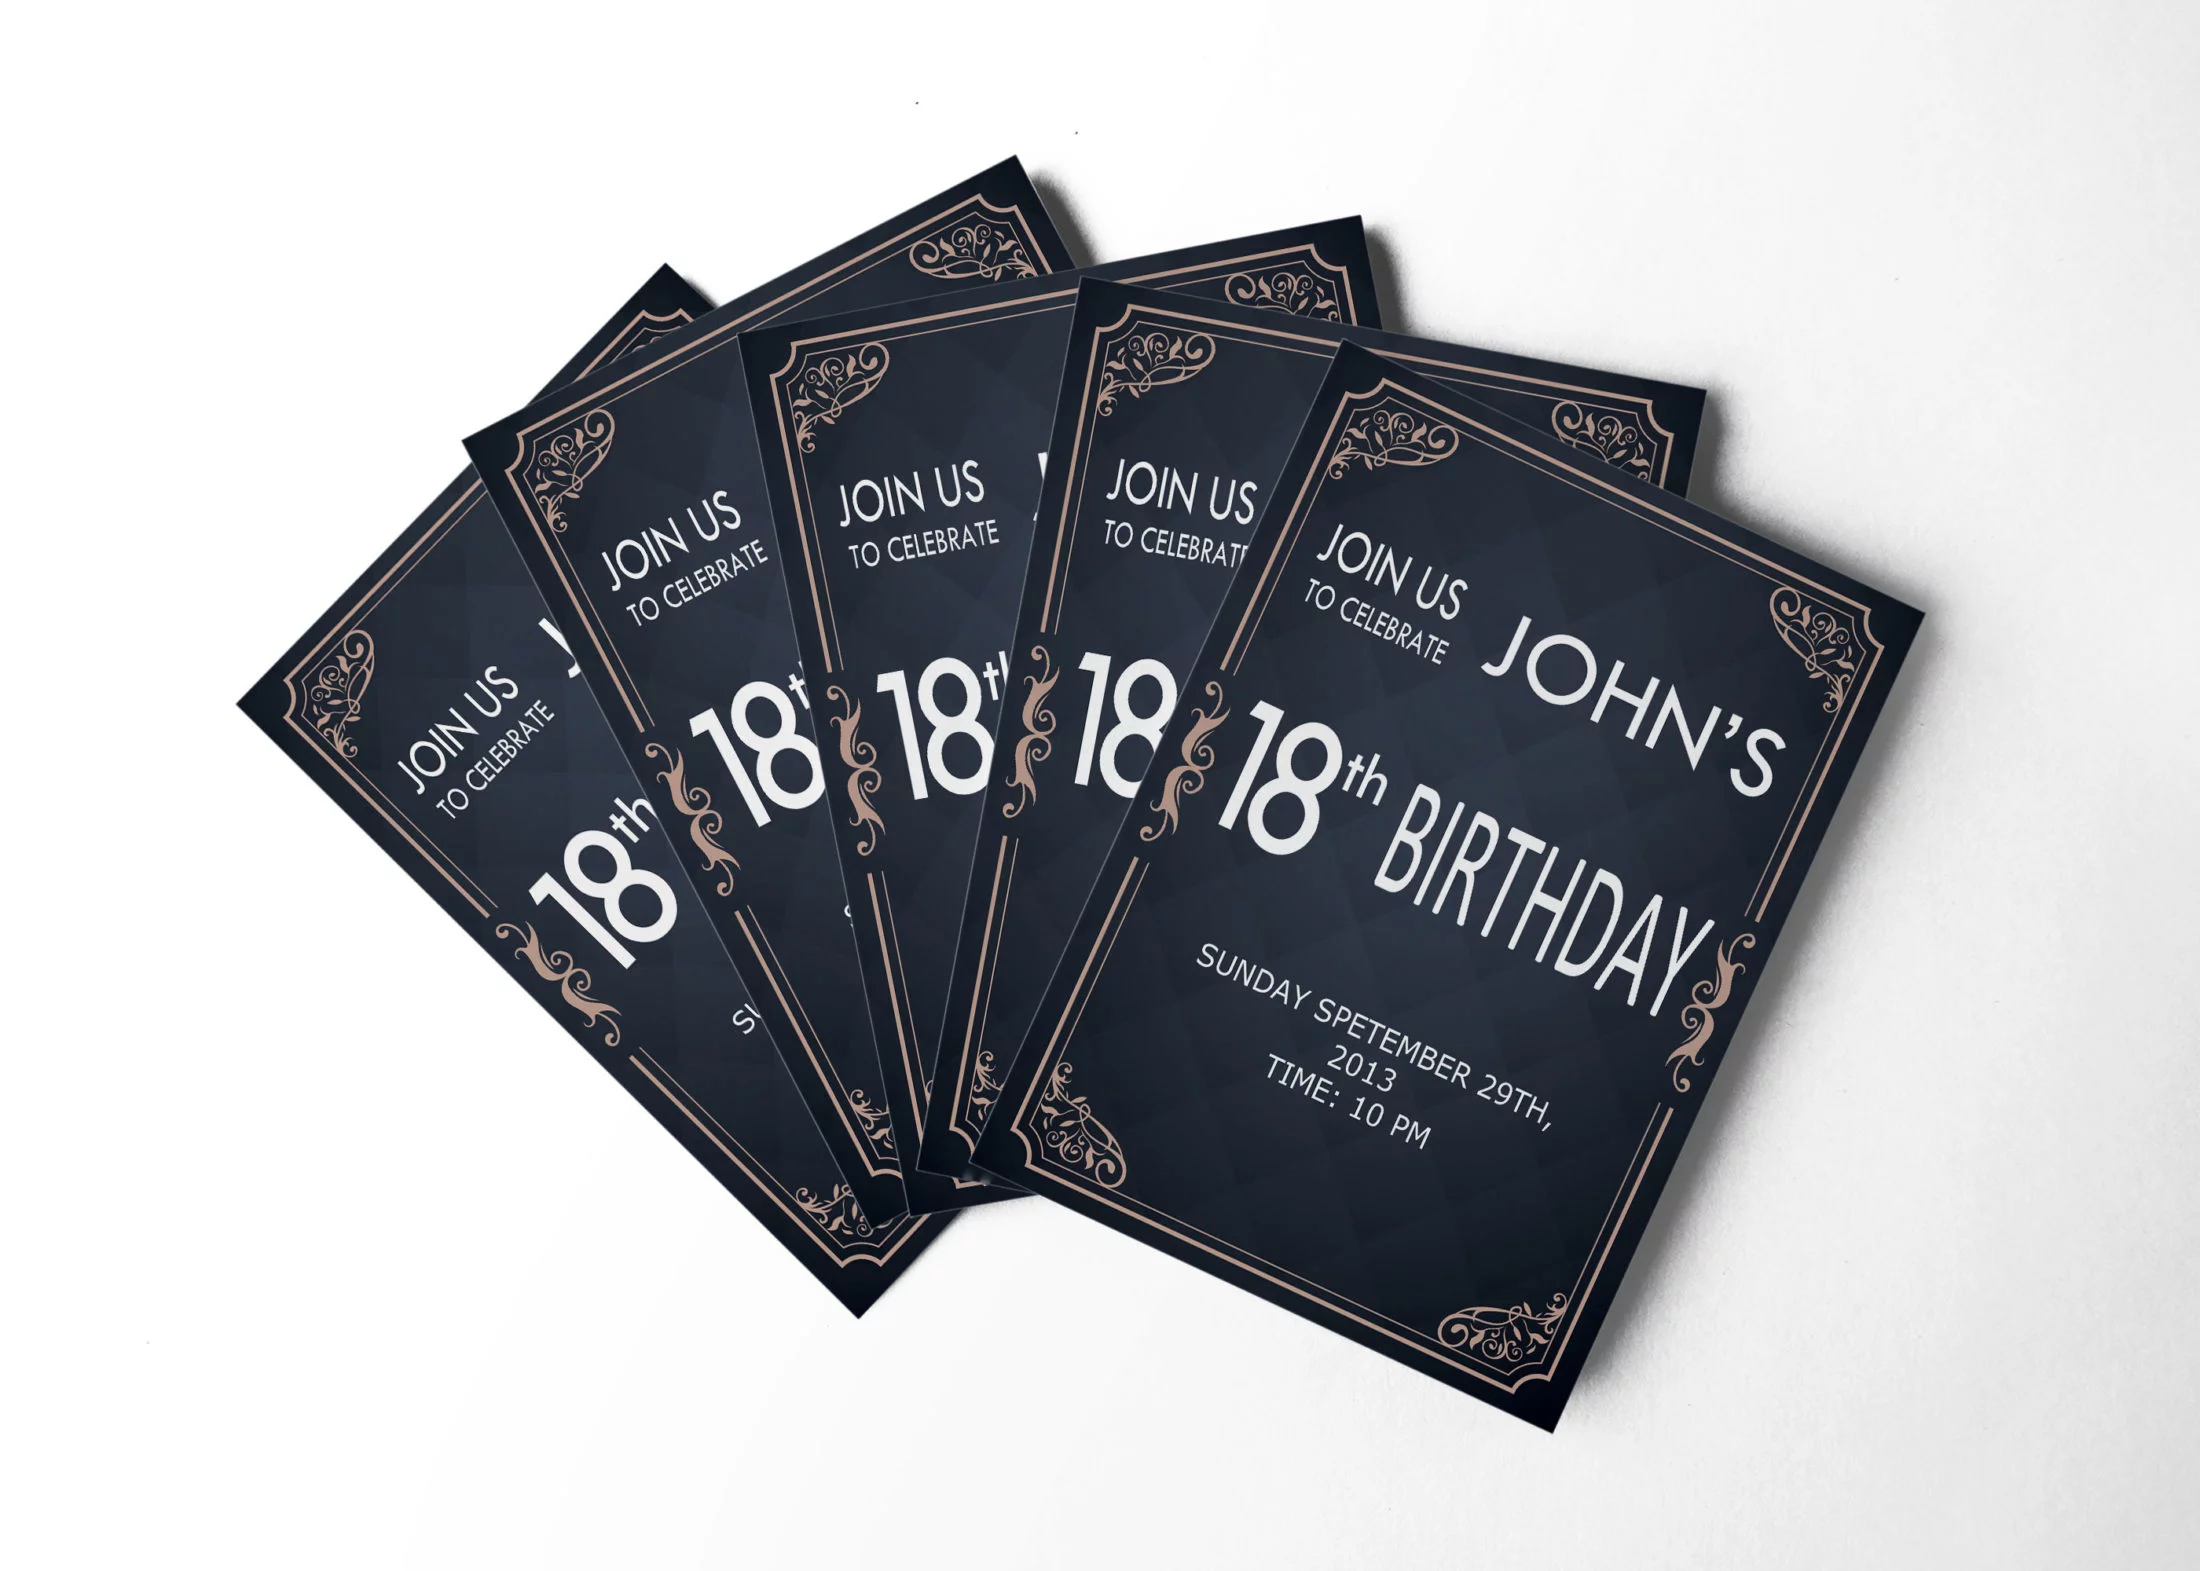 Birthday Invitation Template - Free Vectors & PSDs to Download